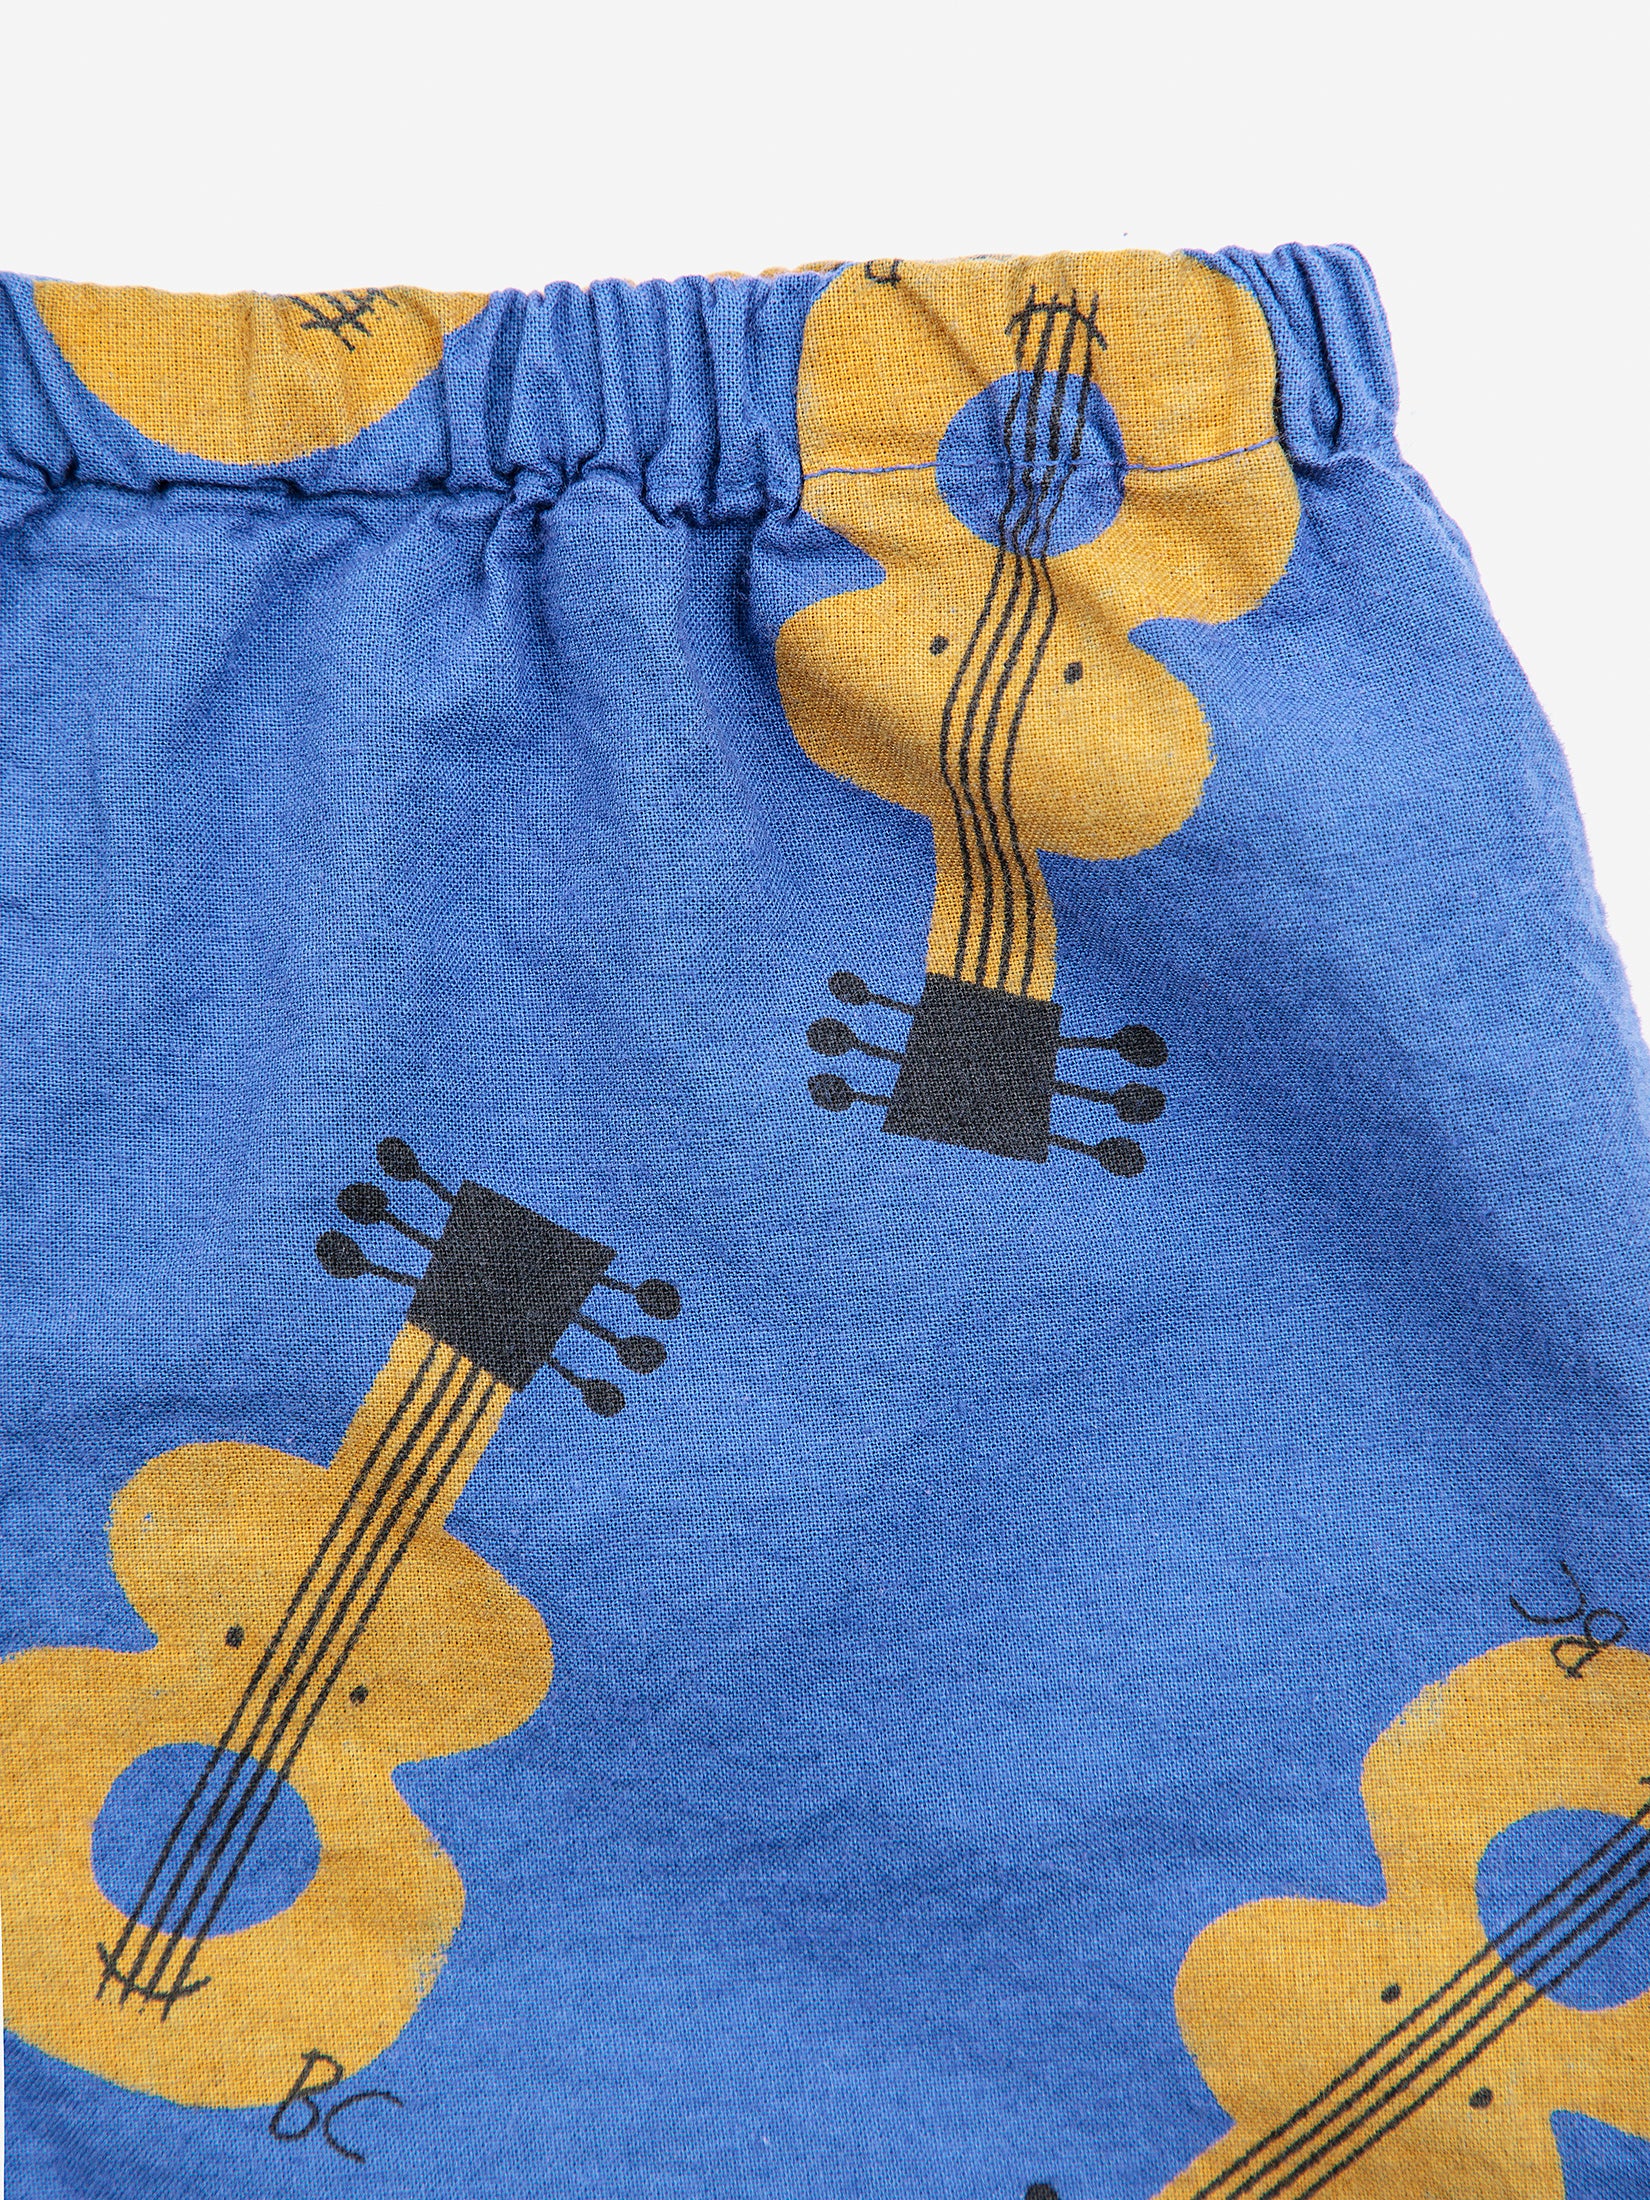 Bobo Choses Baby Acoustic Guitar All Over Woven Shorts - Navy Blue